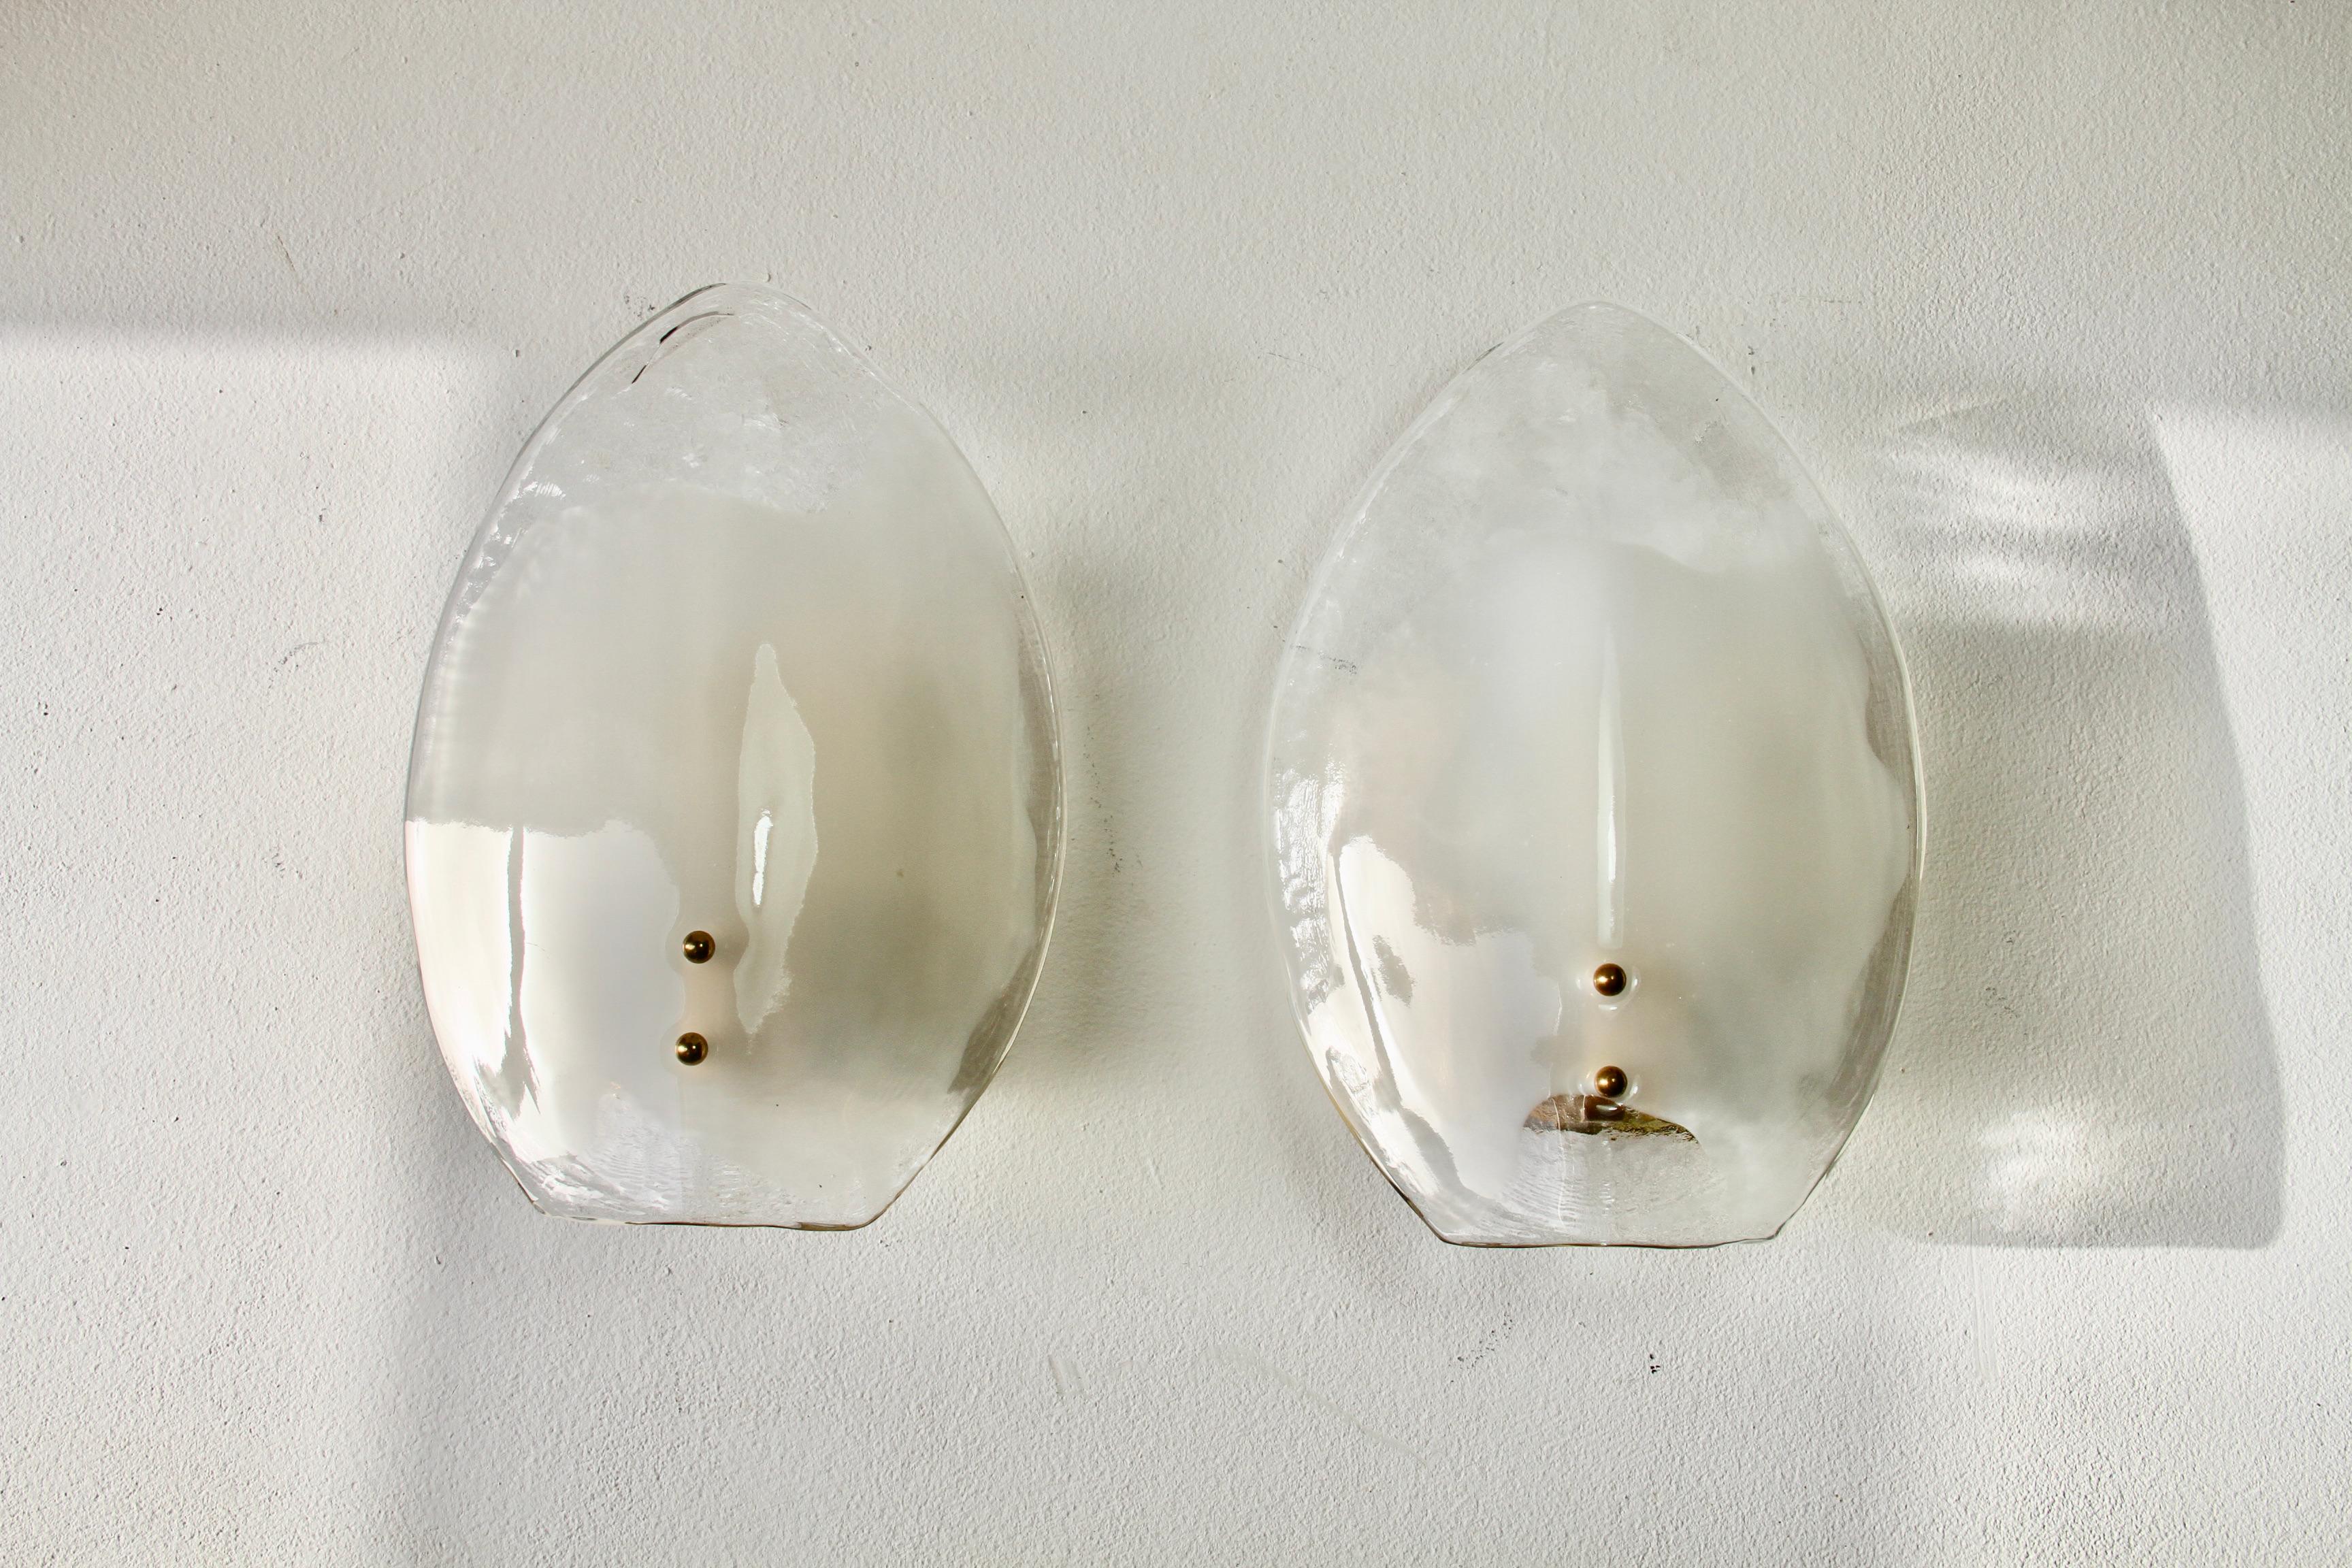 Midcentury Pair of Kalmar Mazzega Murano Glass Wall Lights or Sconces, 1970s For Sale 4